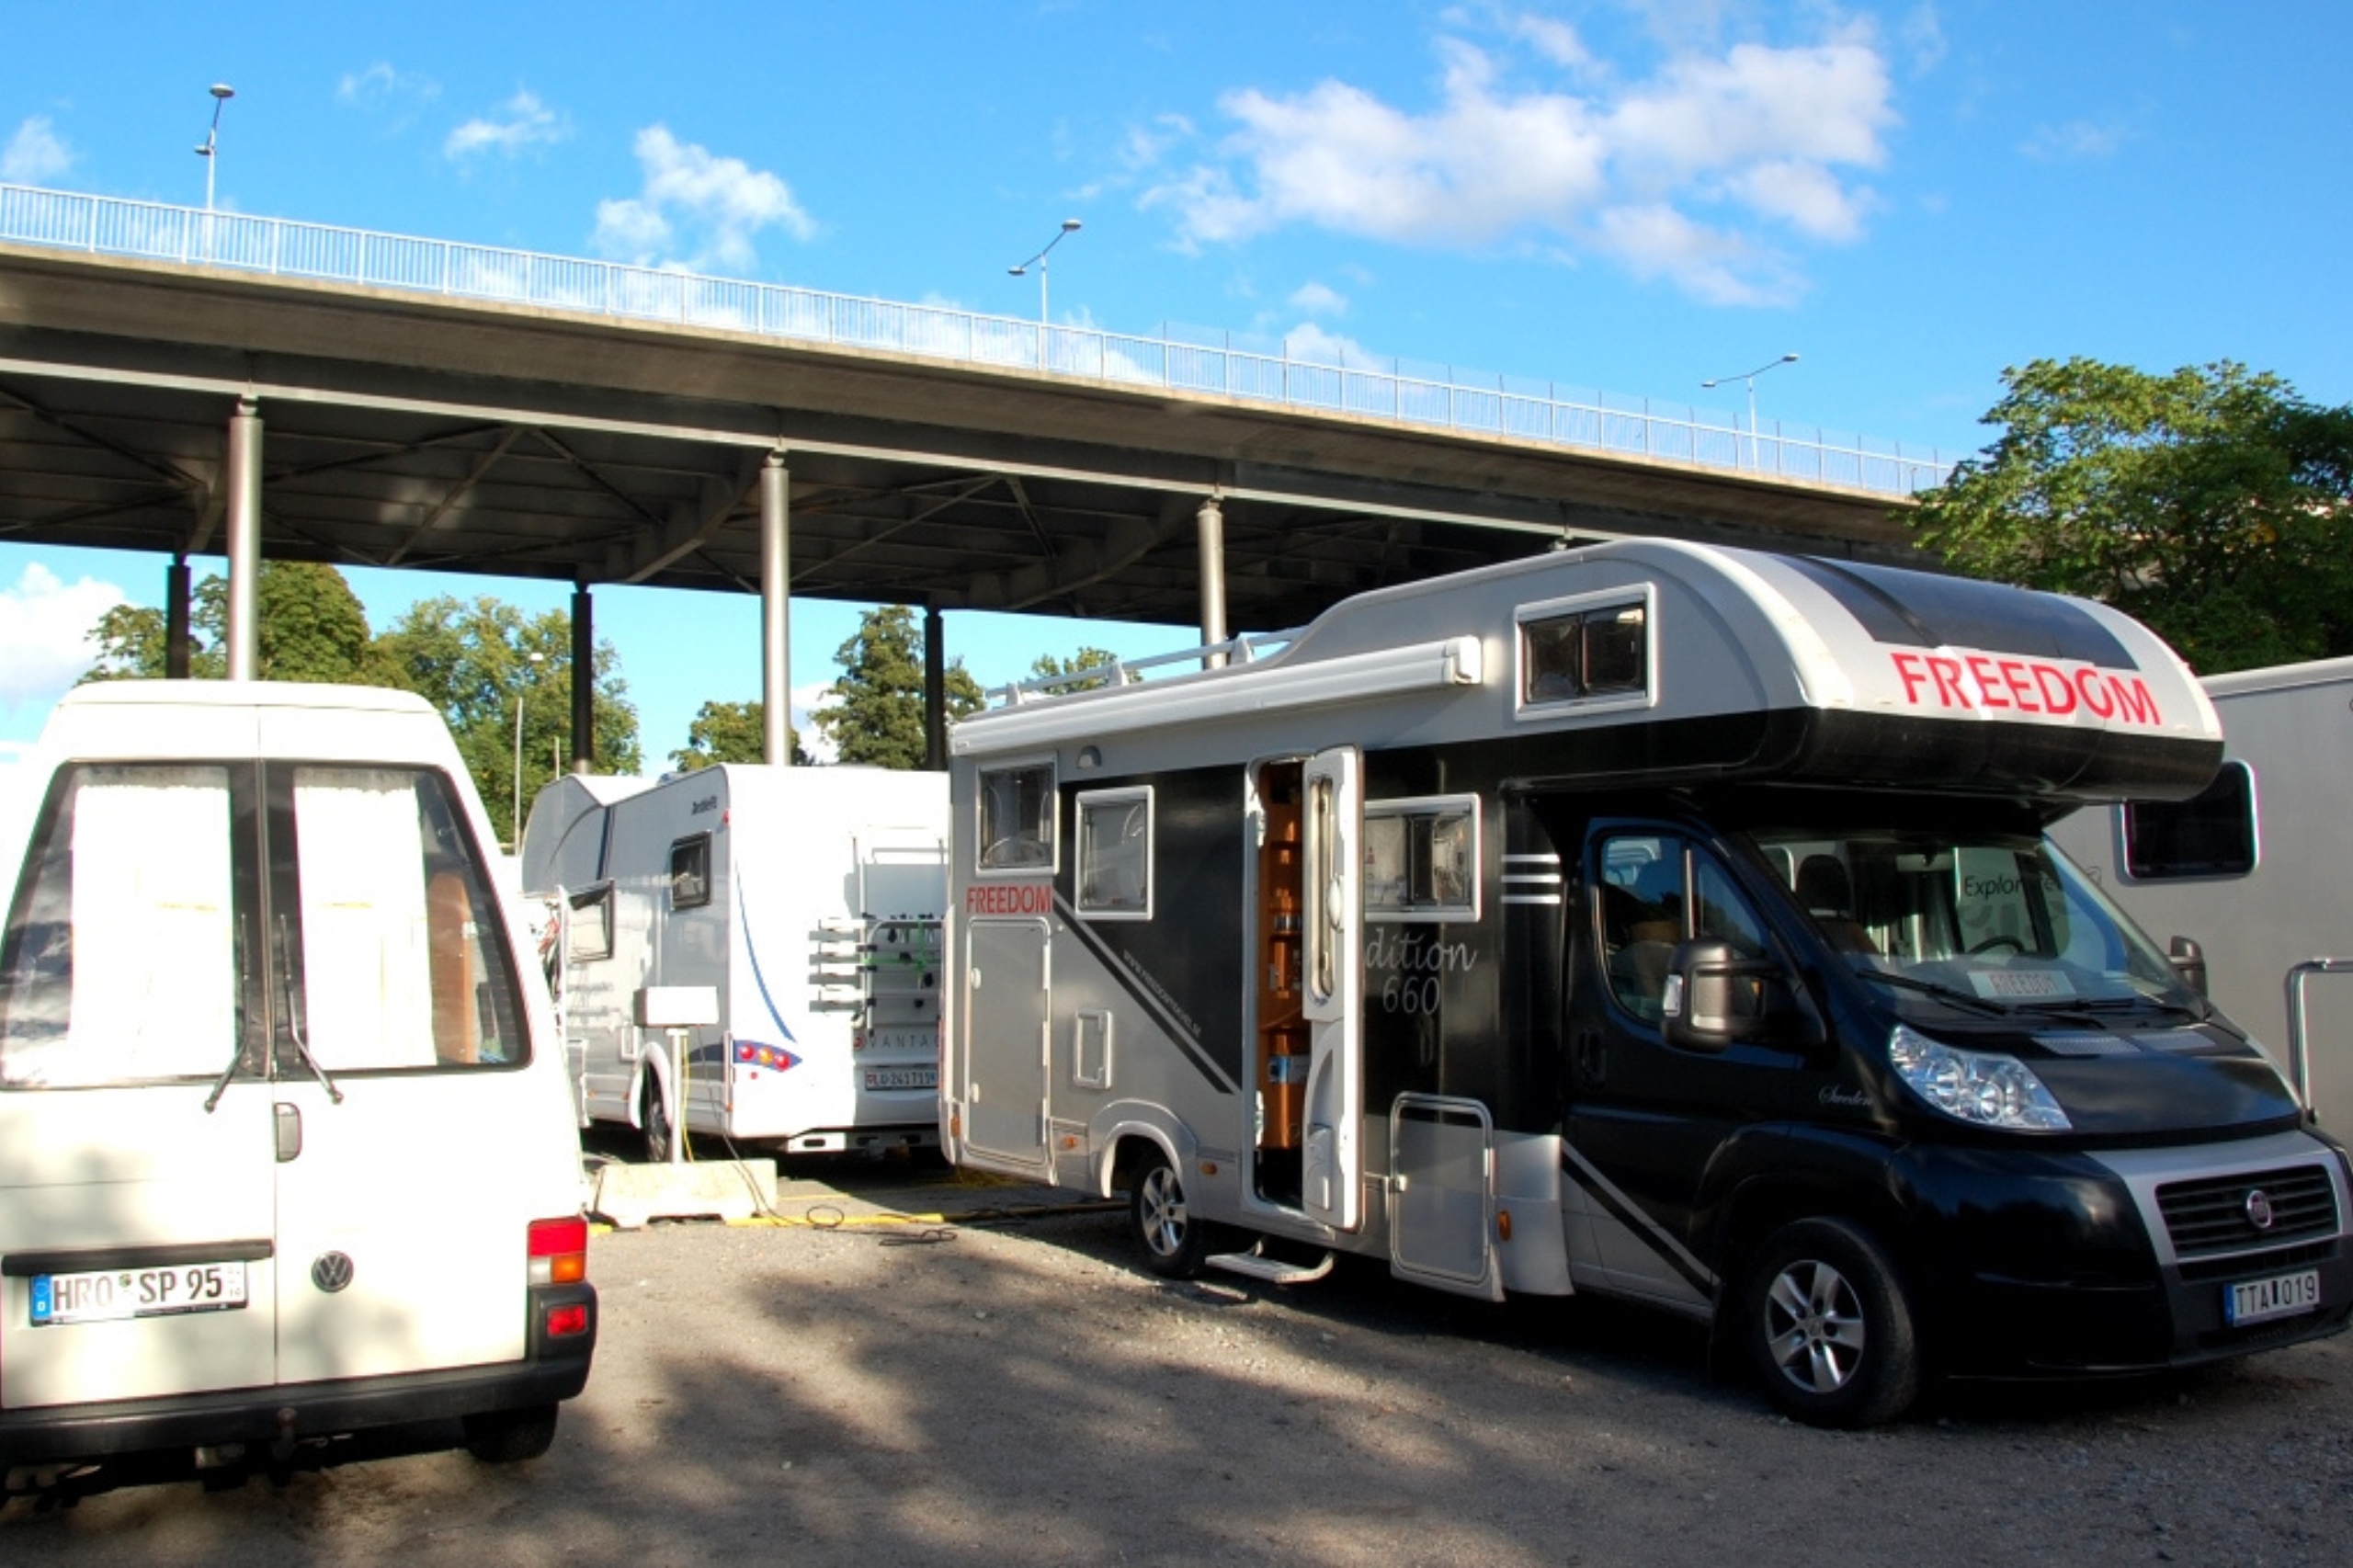 Långholmen’s motorhome camping is a city-close pitch that is open during the summer.